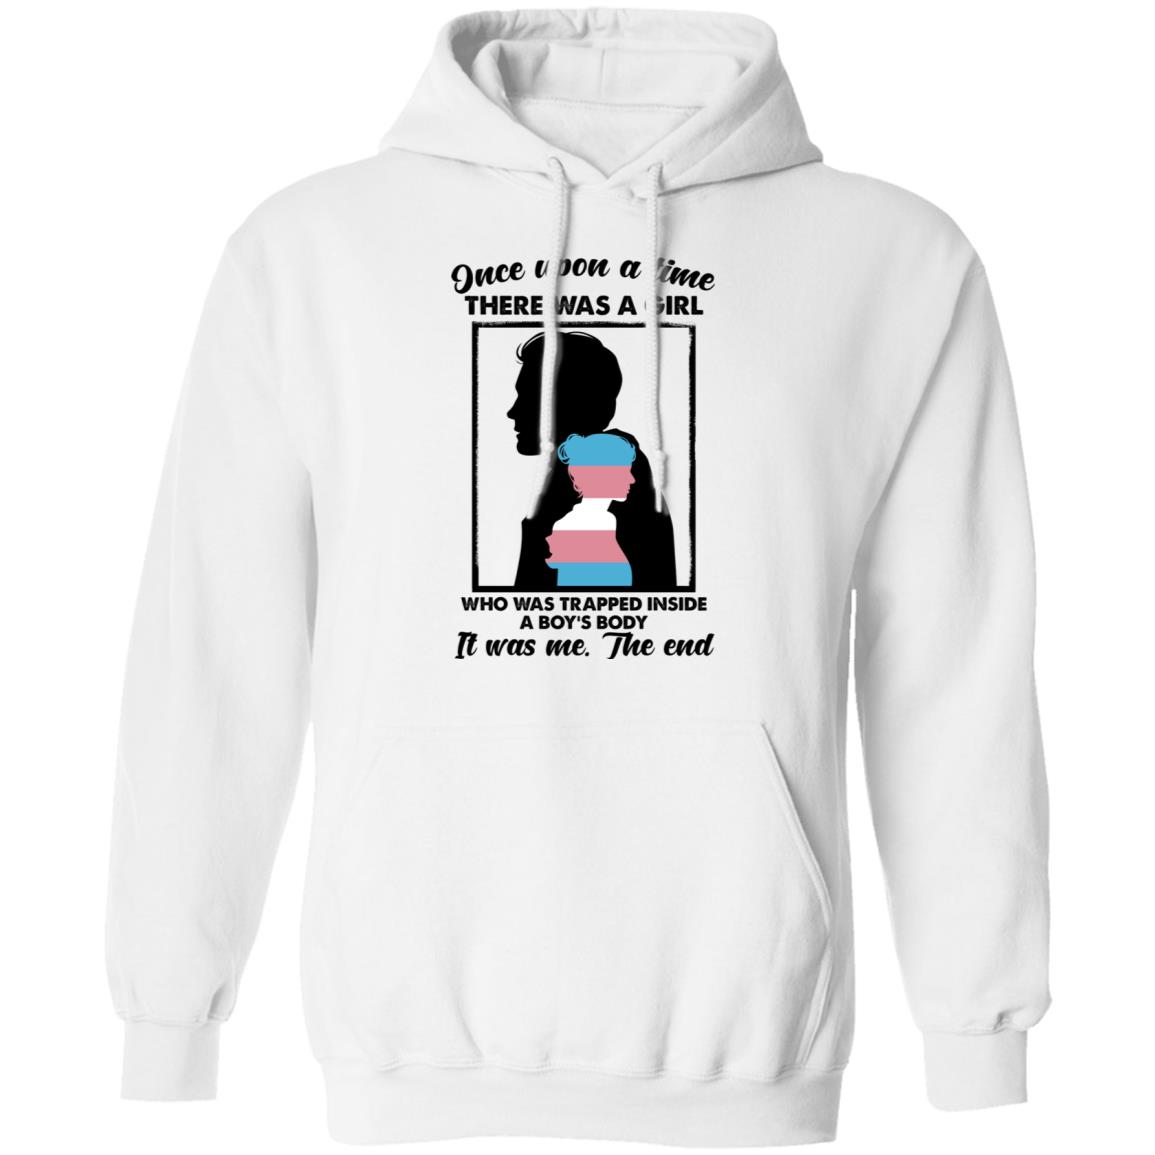 Once Upon A Time Women's Pullover Hooded Hoodie Sweatshirt Black